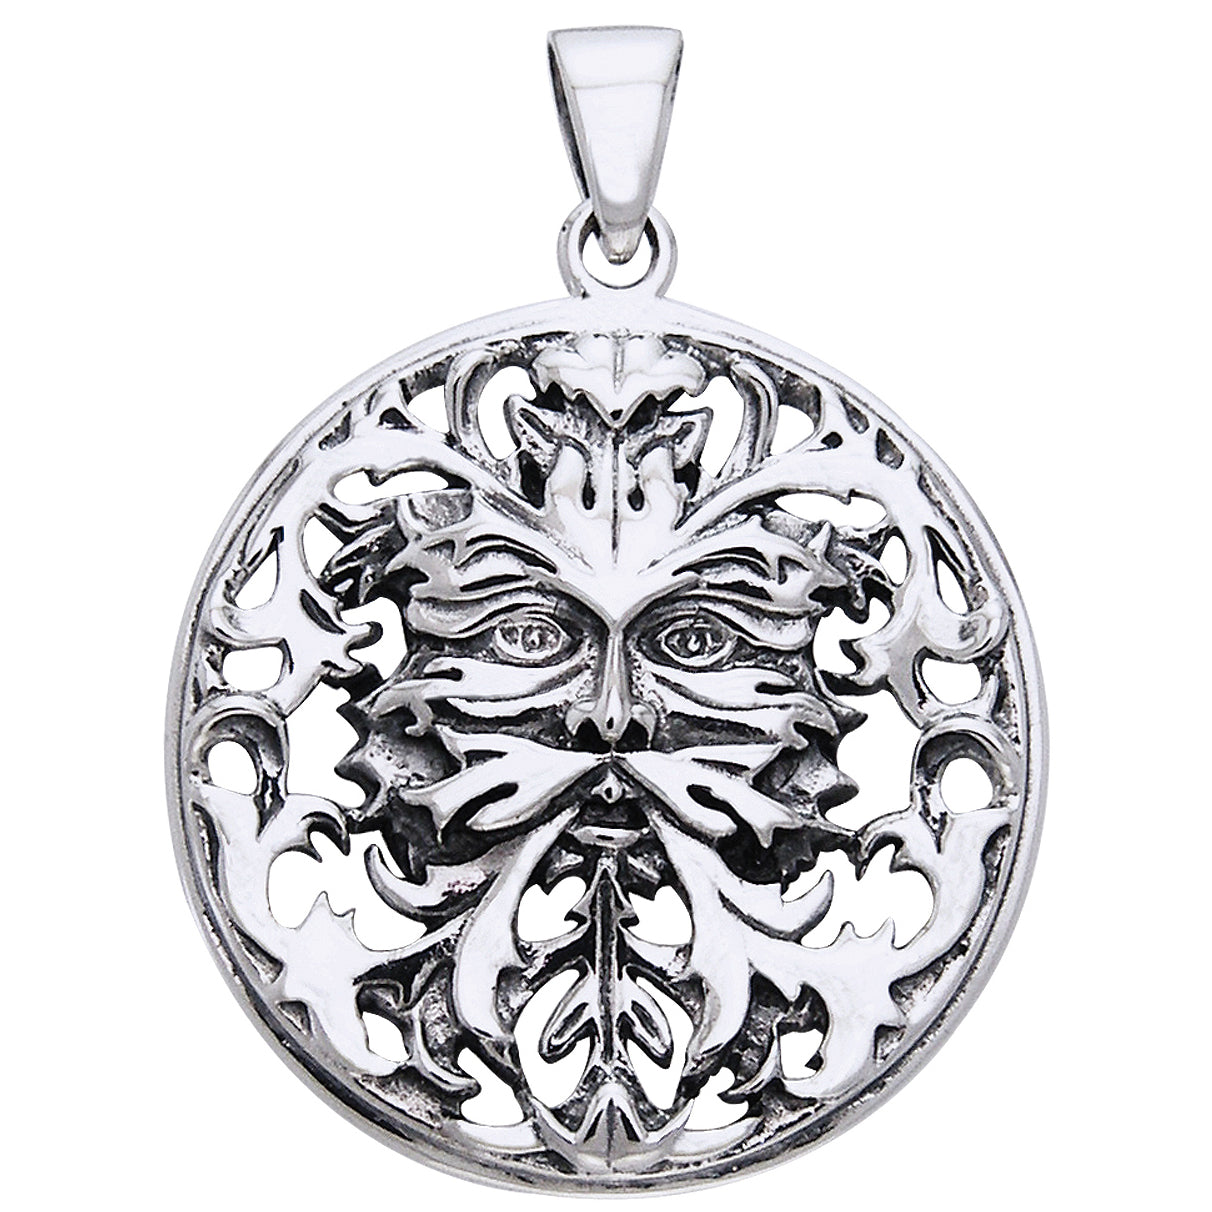 Woodland Spirit - Sterling Silver Mythic Green Man Pendant by Oberon Zell Ravenheart - Silver Insanity